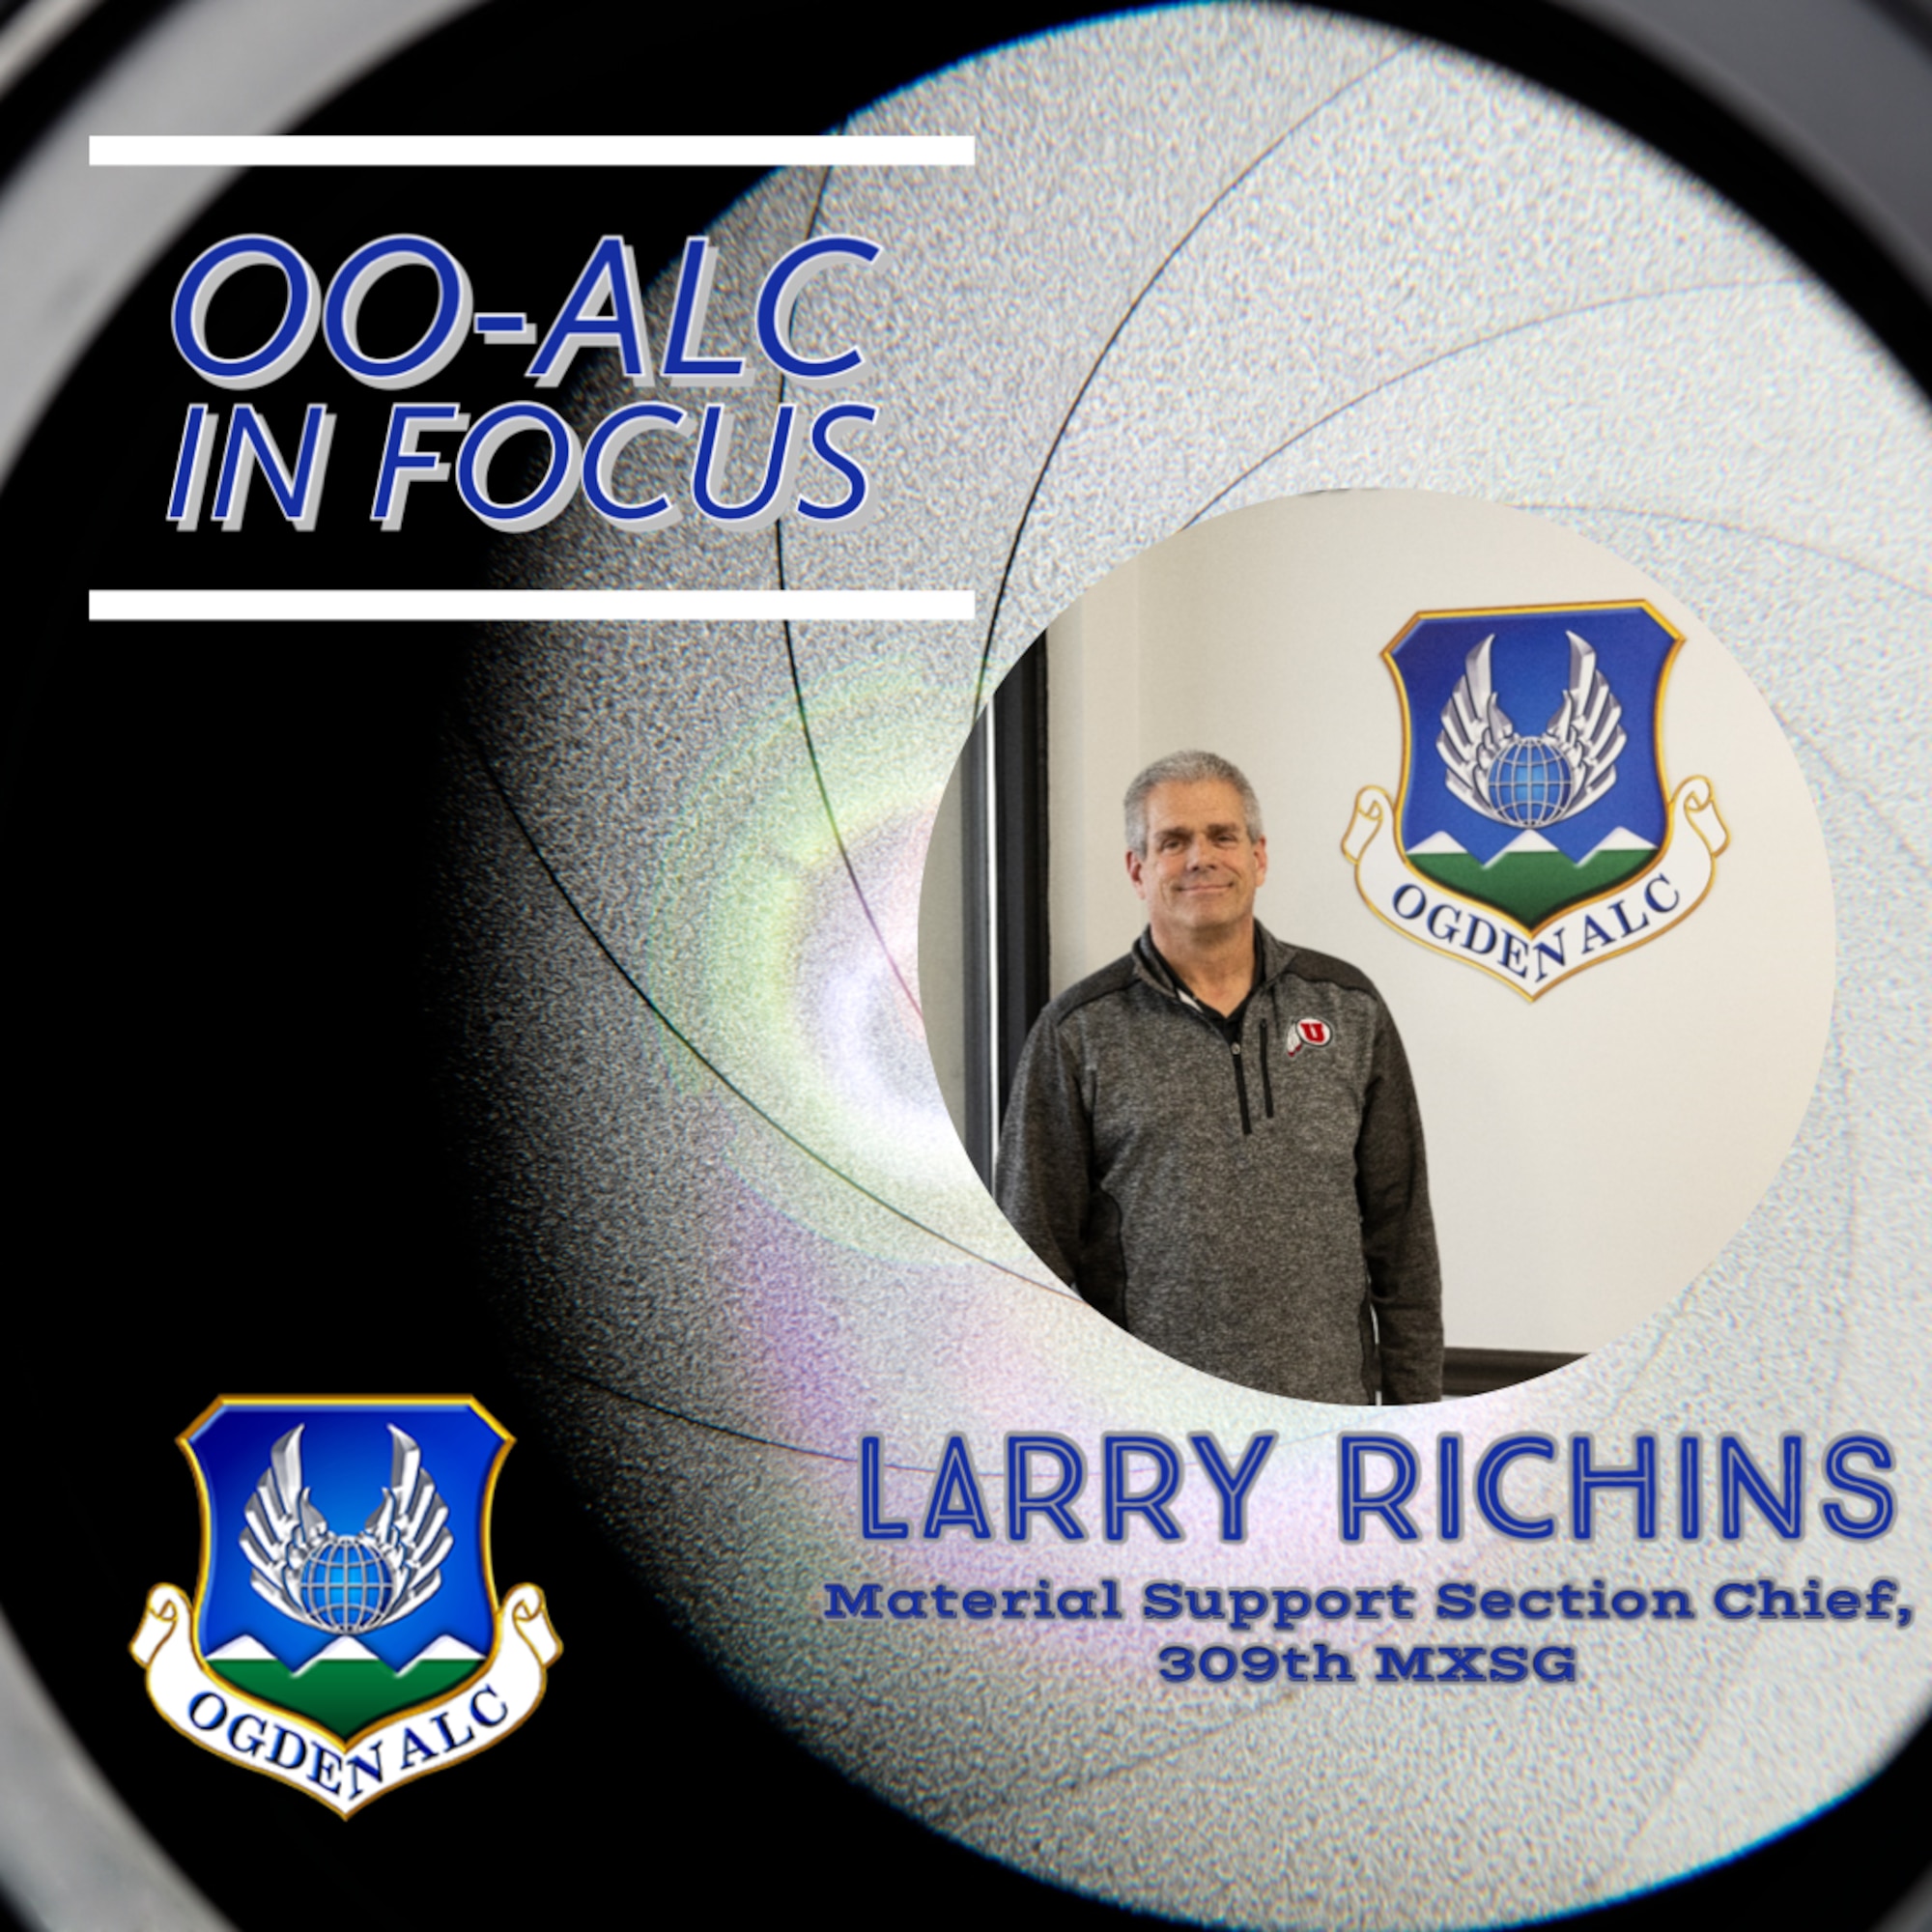 A graphic featuring the Ogden ALC emblem and a portrait of Larry Richins, along with his name and duty title.